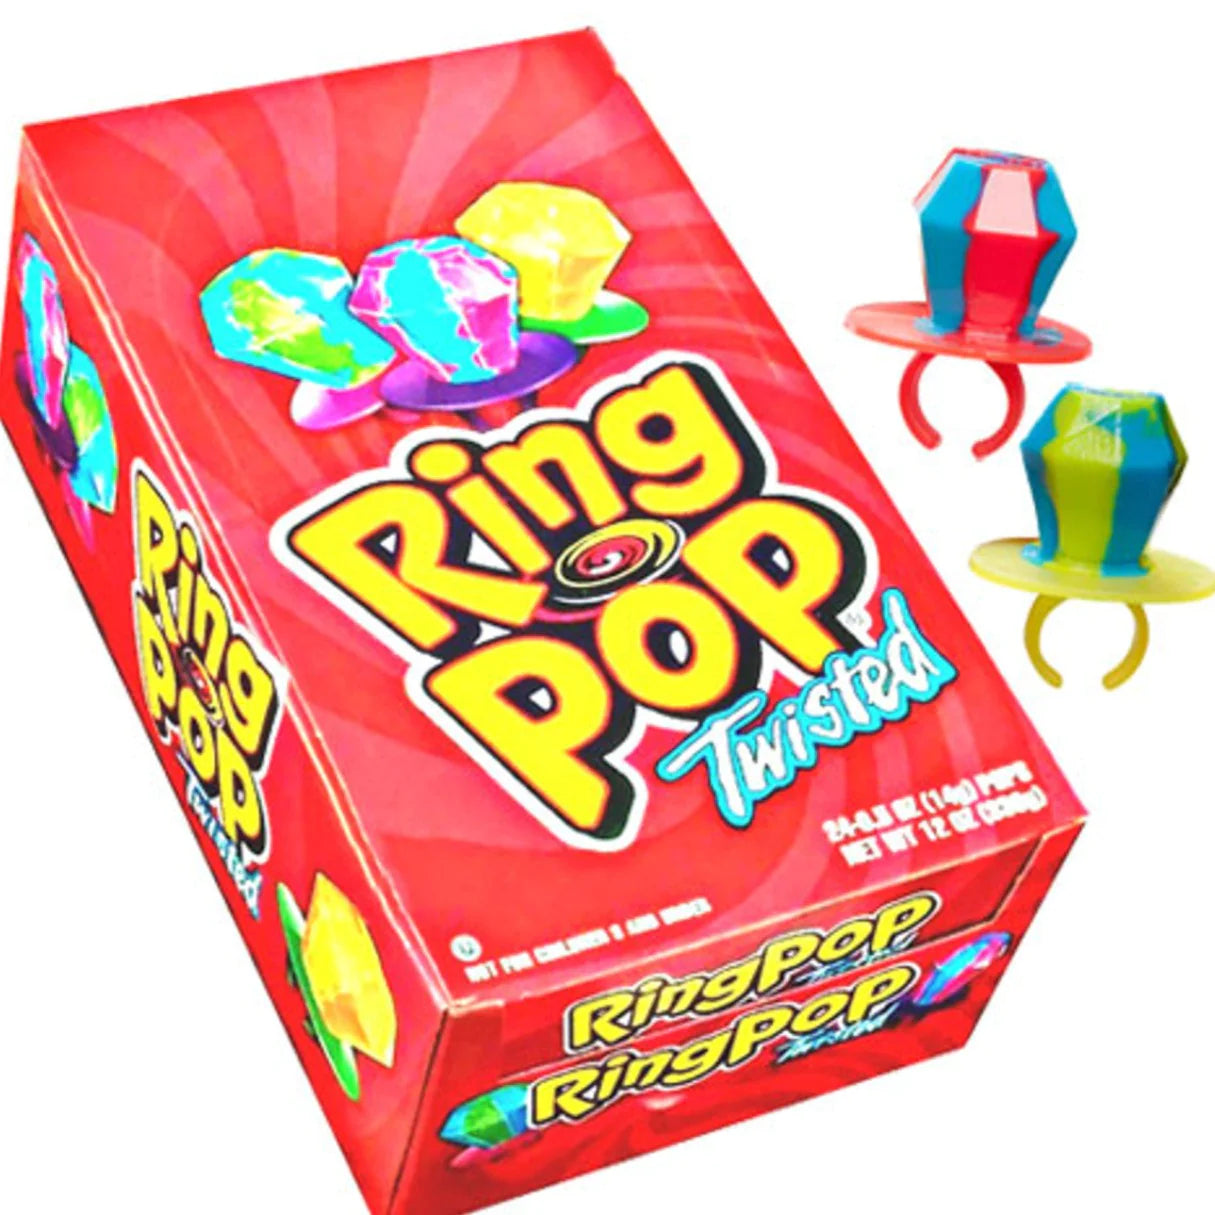 Ring Pop Twisted